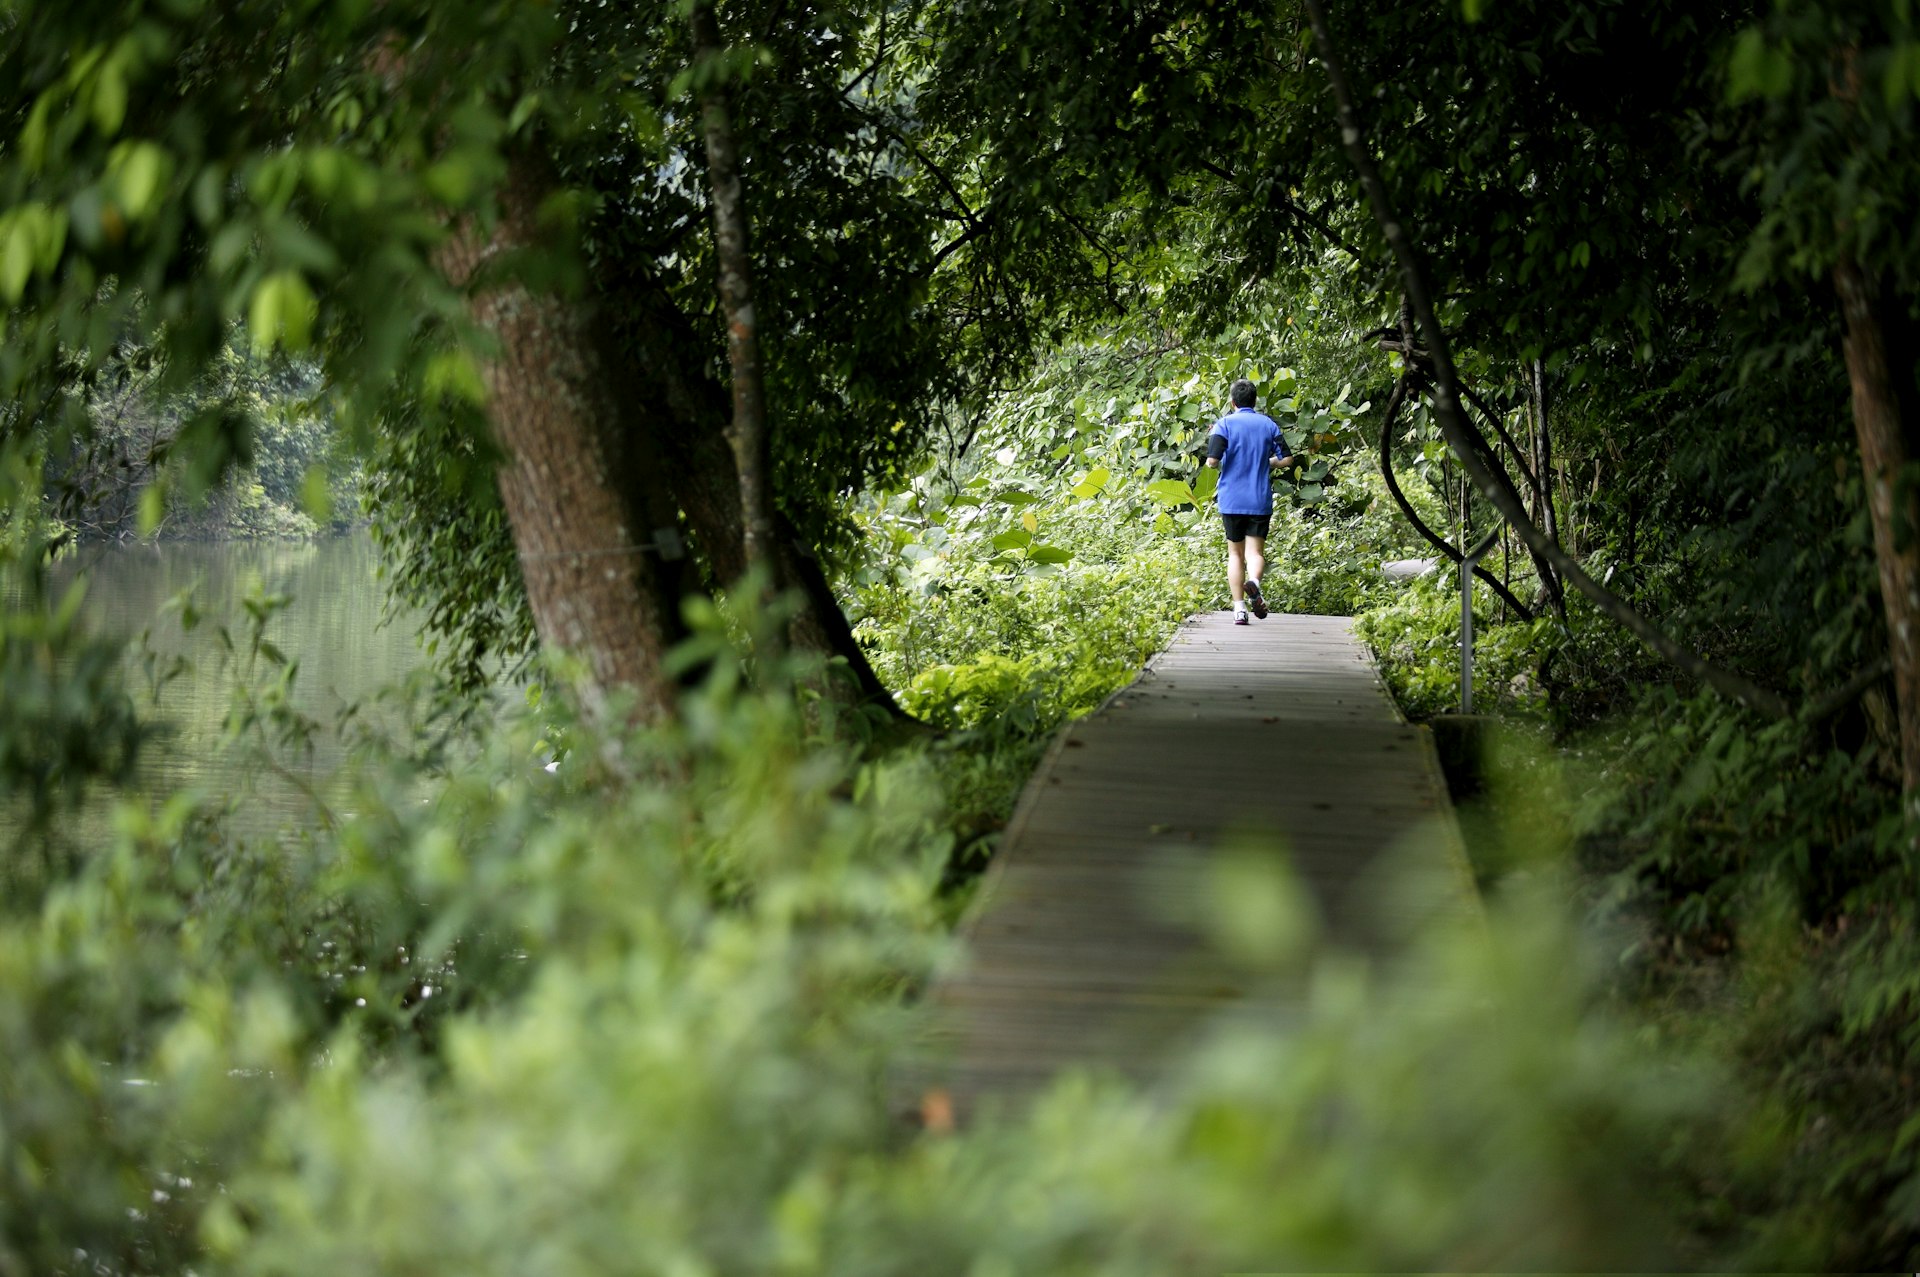 A jogger on a boardwalk path at MacRitchie Reservoir, surrounded by greenery